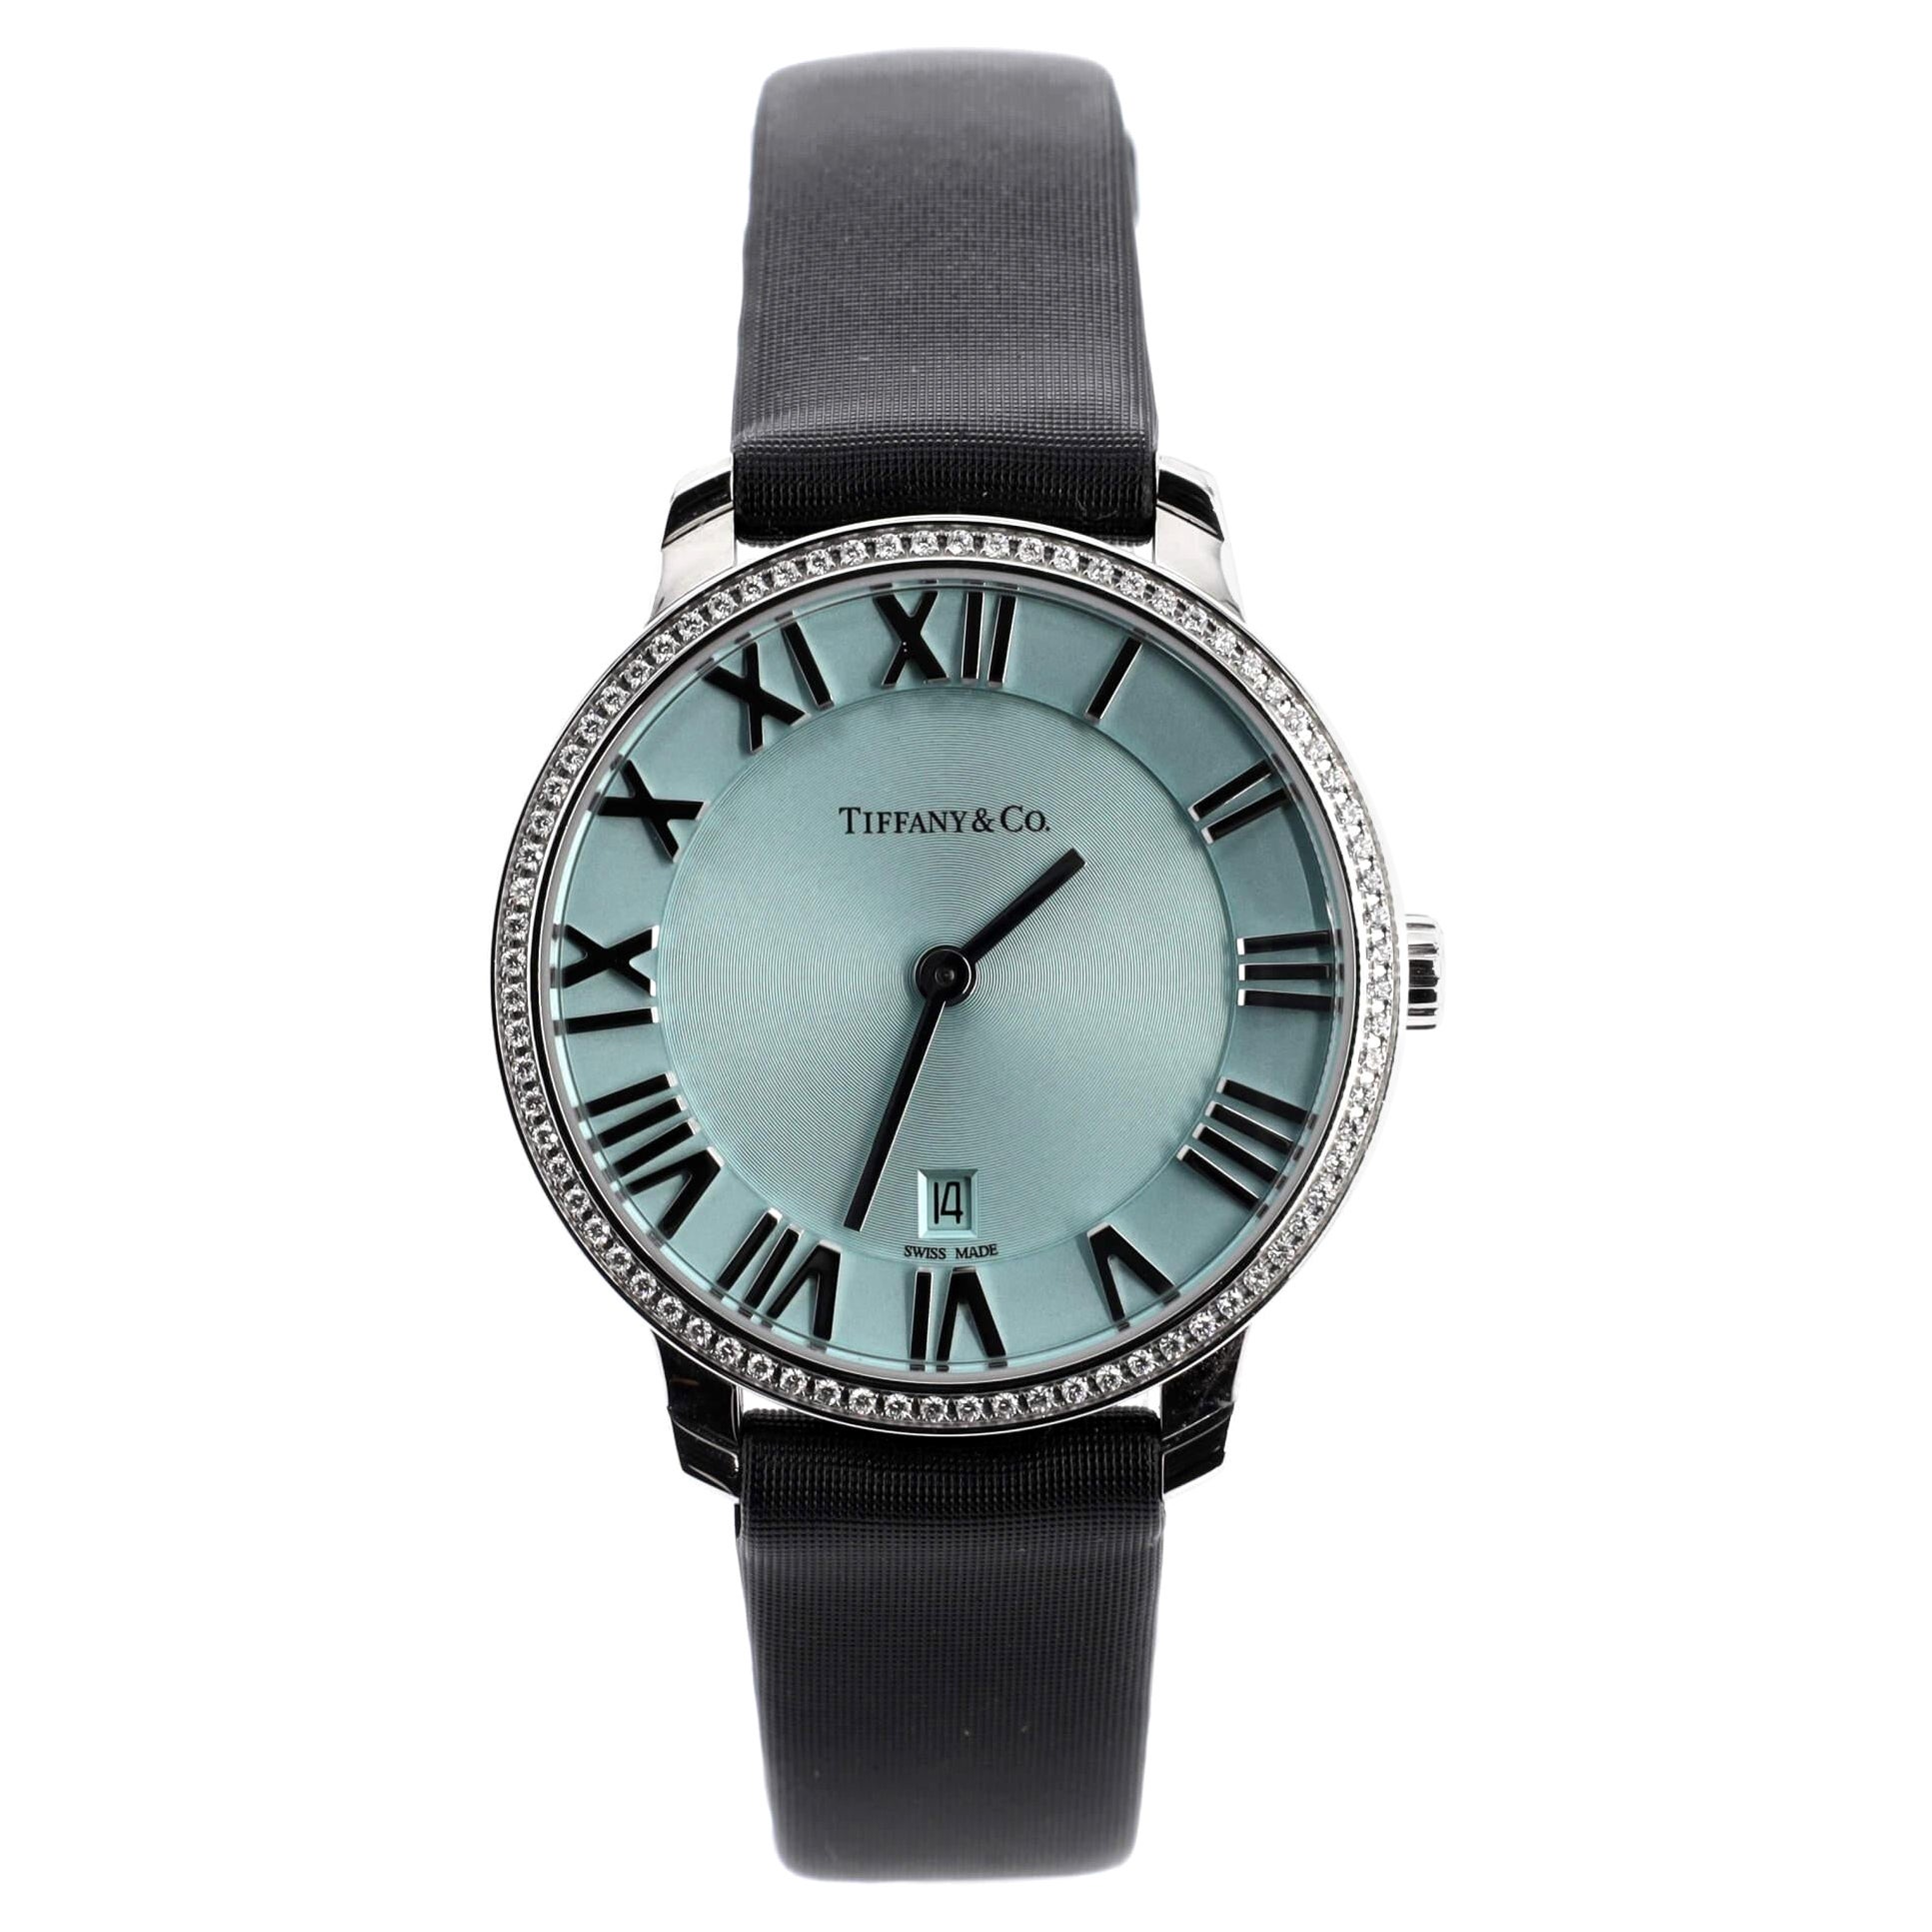 Tiffany & Co. Atlas 2-Hand Quartz Watch Stainless Steel and Satin with Diamond